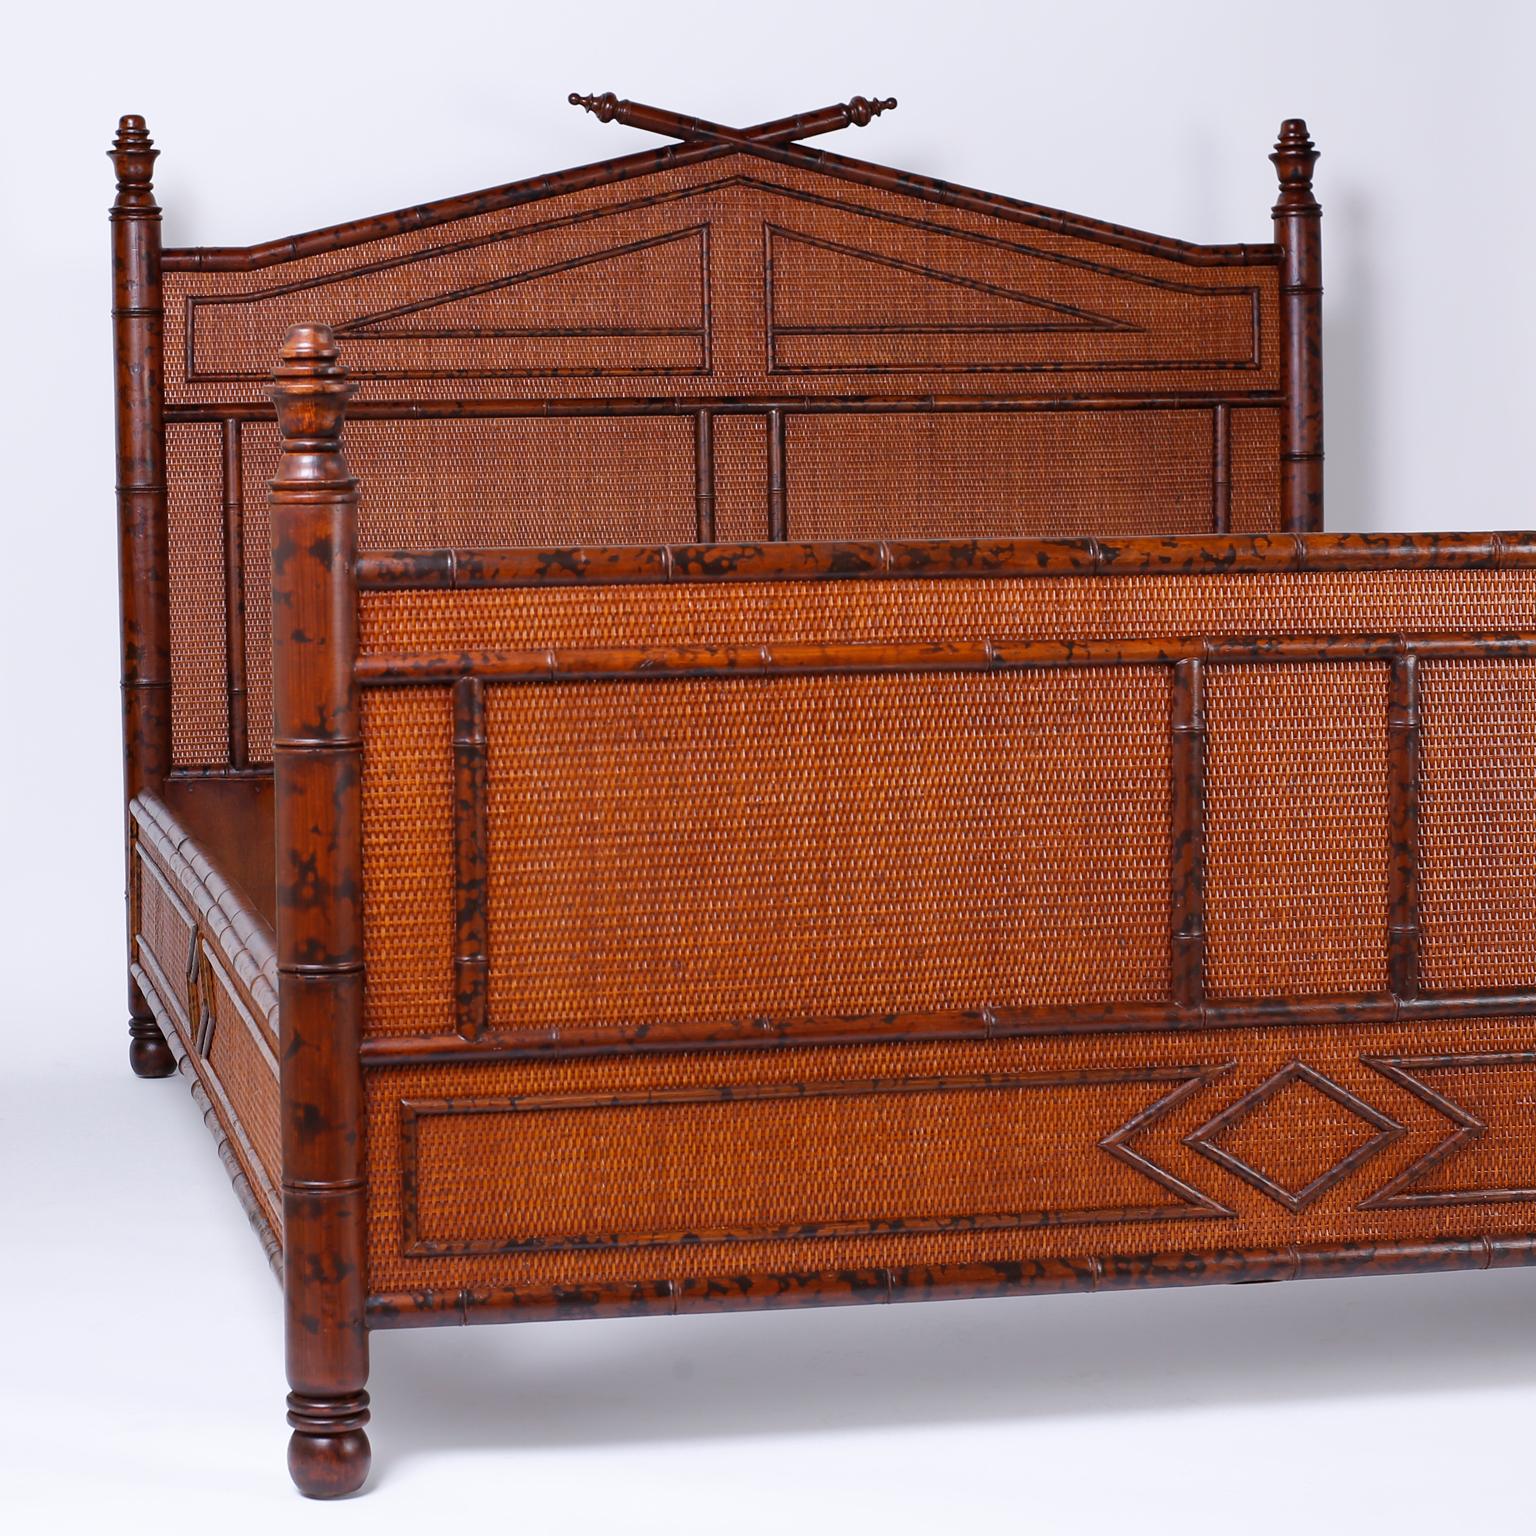 Midcentury British Colonial style faux burnt bamboo and grasscloth queen-size bed frame with turned posts and applied geometric designs. Modern interpretation of an iconic look complete with metal bed slats. Rattan and wicker decor!

Inside